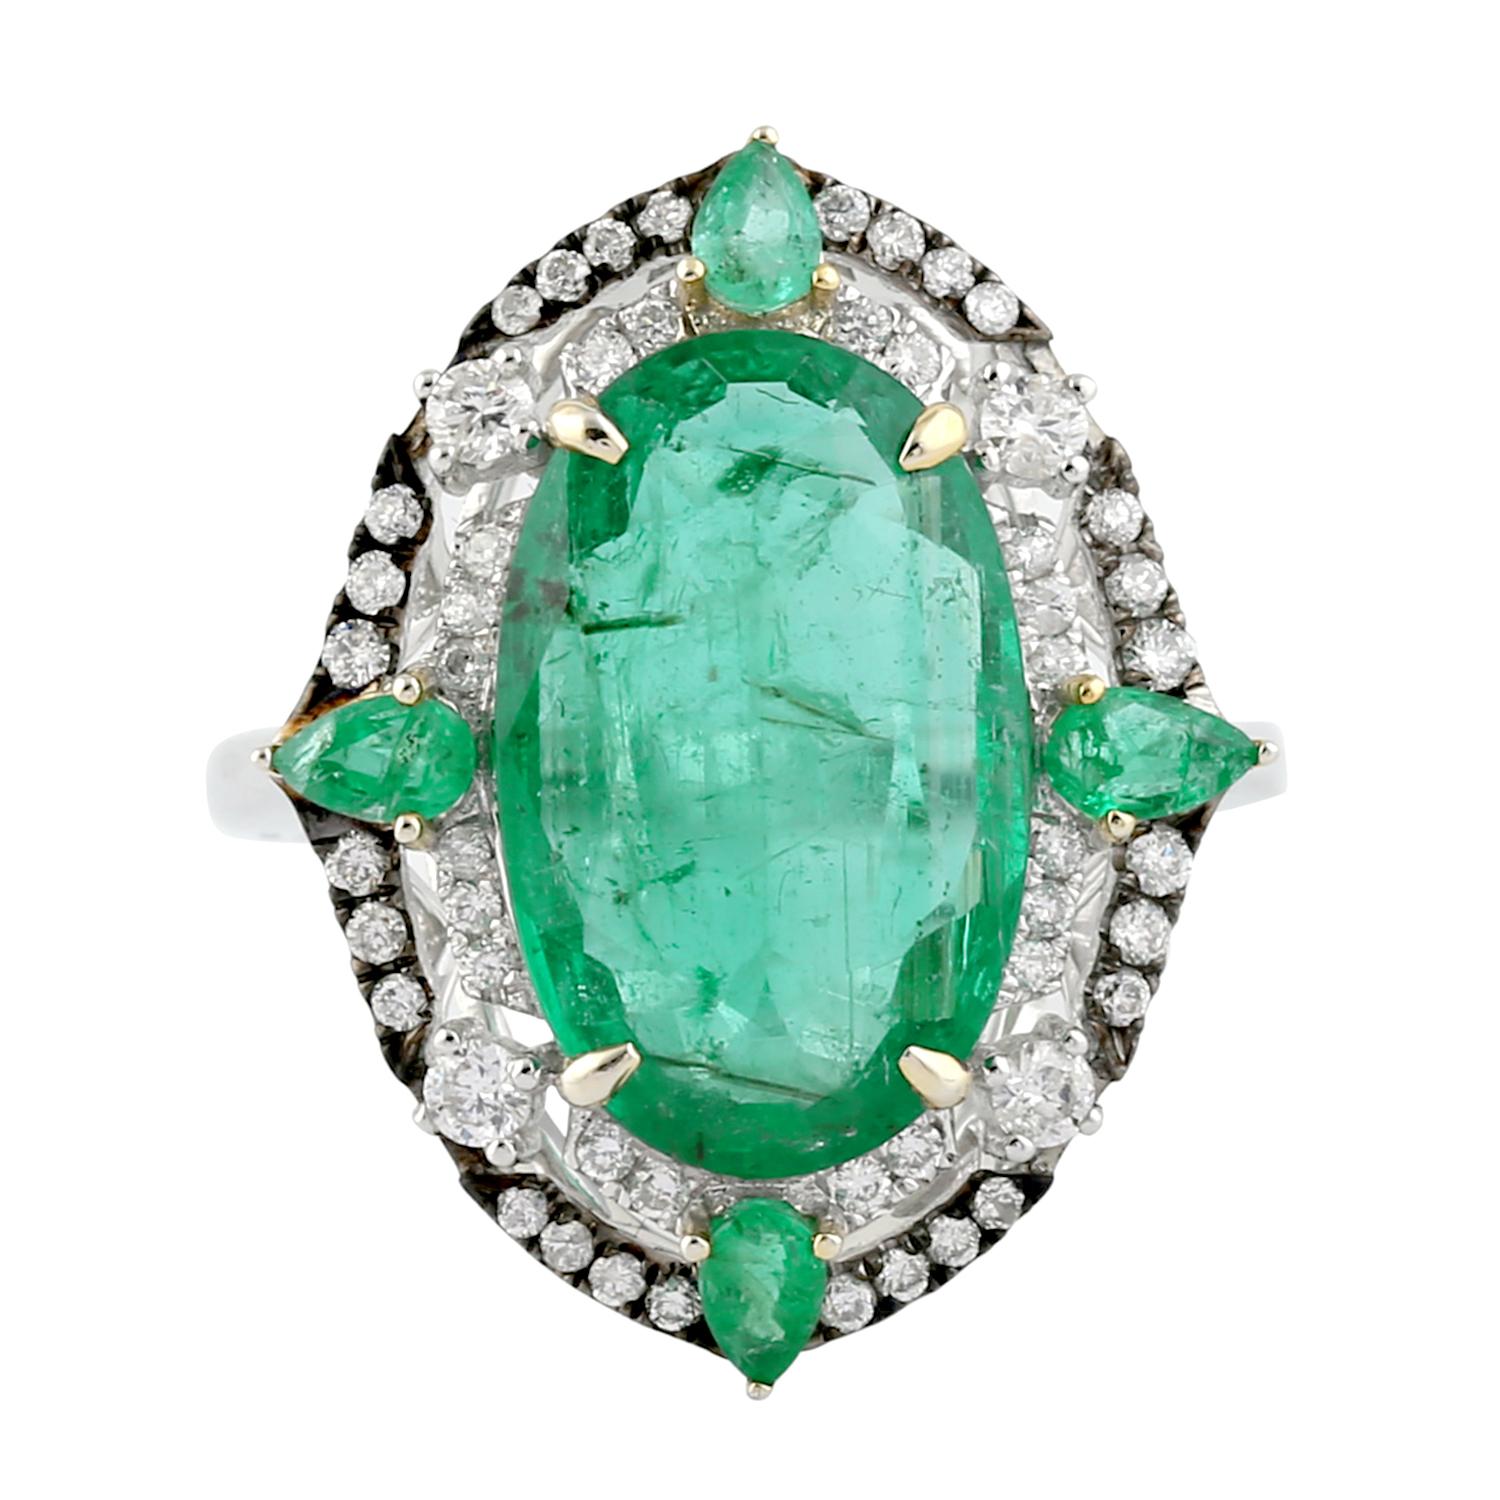 Lovely Slice Emerald ring with diamonds set in 18K white gold, good to be worn for any occasion.

Ring Size 6.5 ( can be sized )

Gold 18K: 5.7gms
Diamond: .53cts
Emerald: 4.98cts

